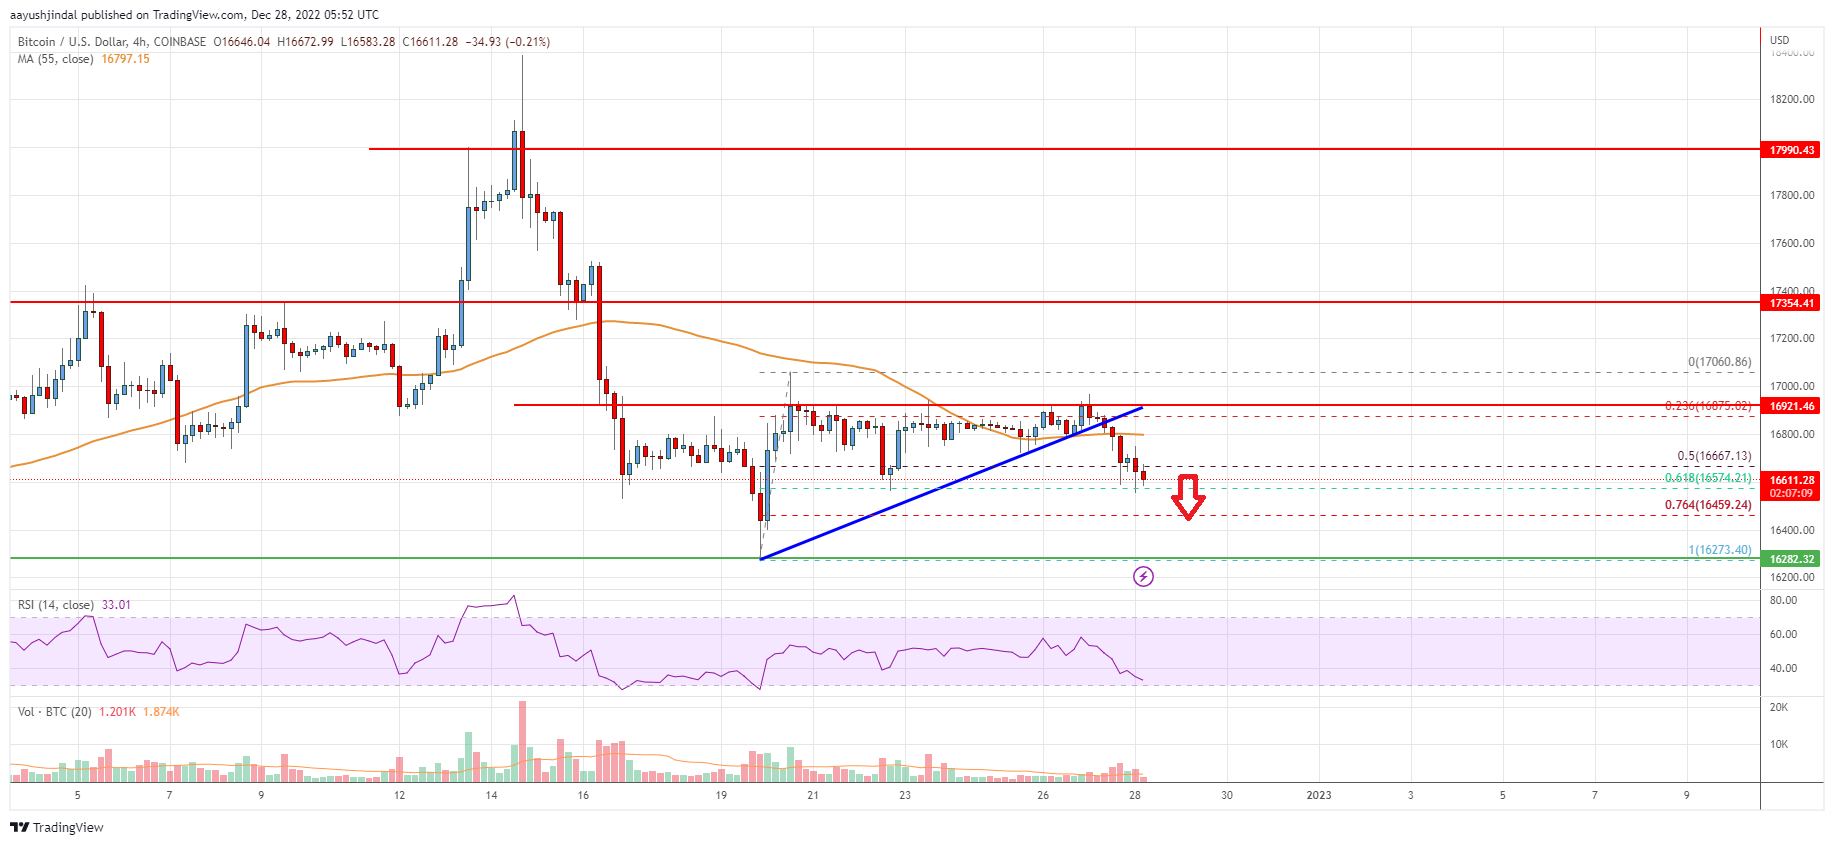 Bitcoin Price Analysis: BTC Could Drop To New 2022 Lows